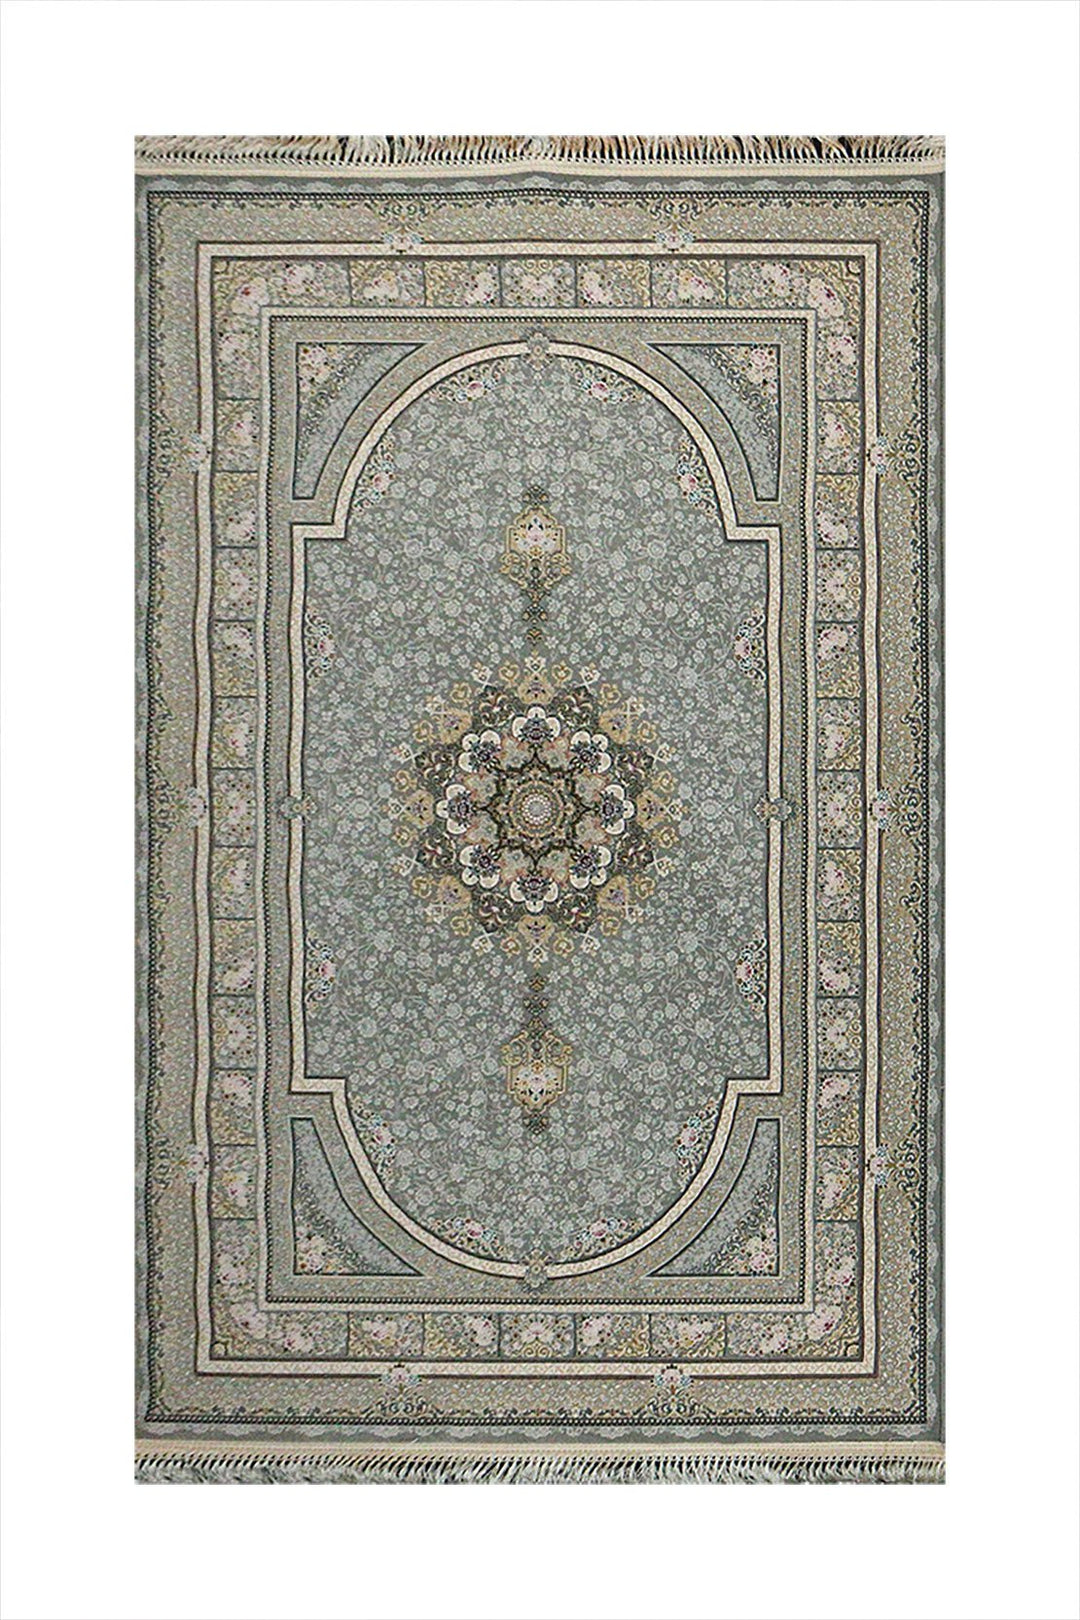 Iranian Premium Quality Moonaco Collection Rug - 4.9 x 7.3 FT - Gray - Resilient Construction for Long-Lasting Use - V Surfaces